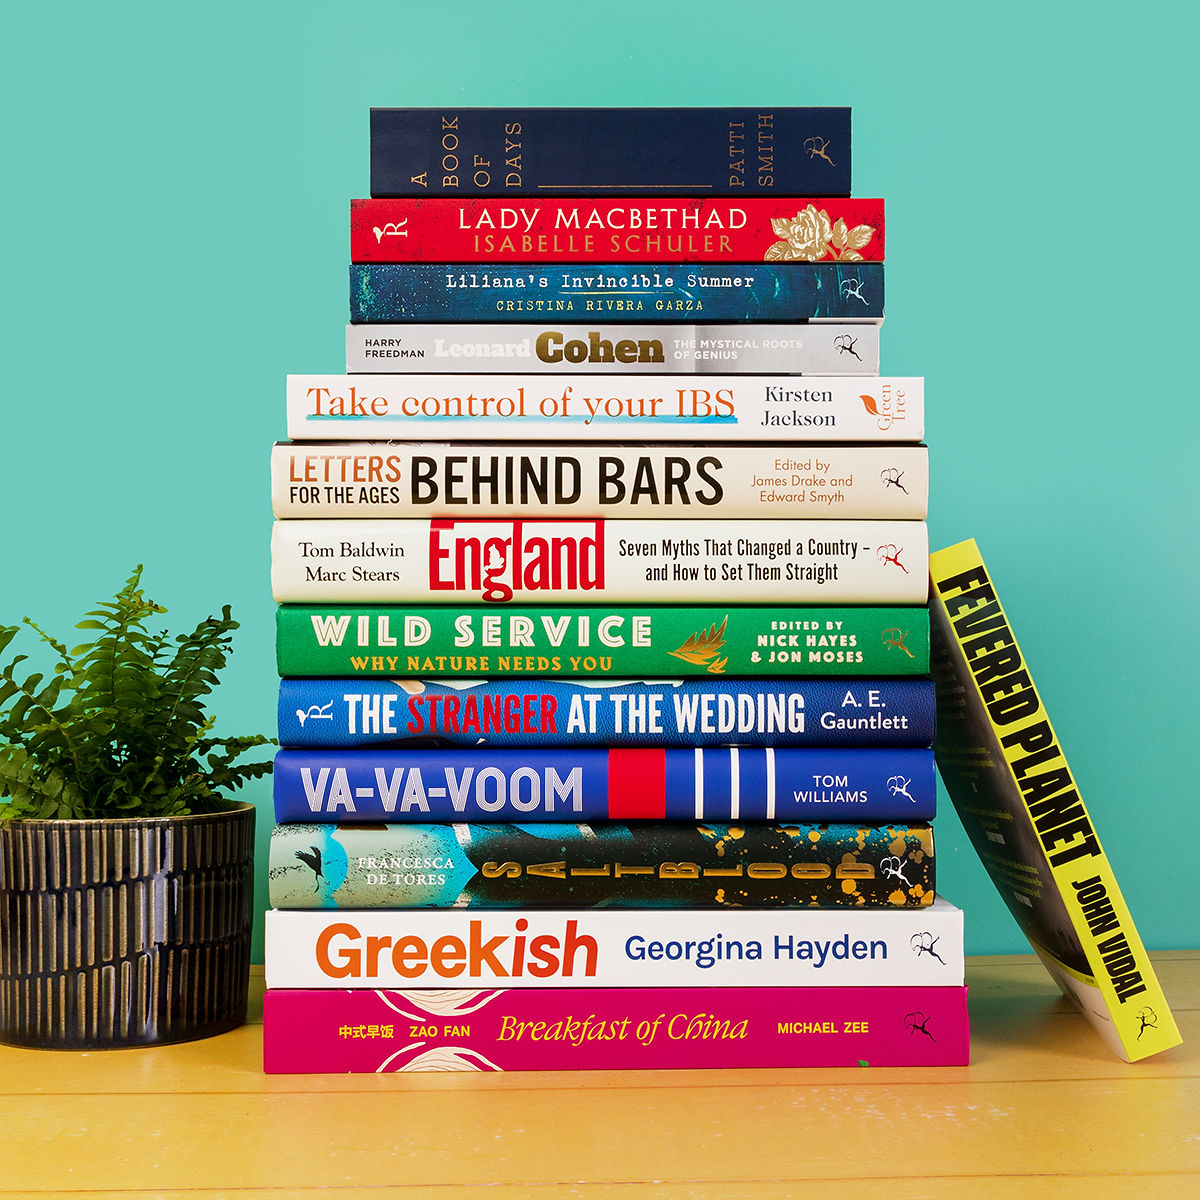 📚 Happy publication day! We have a gorgeous, bumper book stack for you to devour. What has taken your eye? Thread 👇🧵